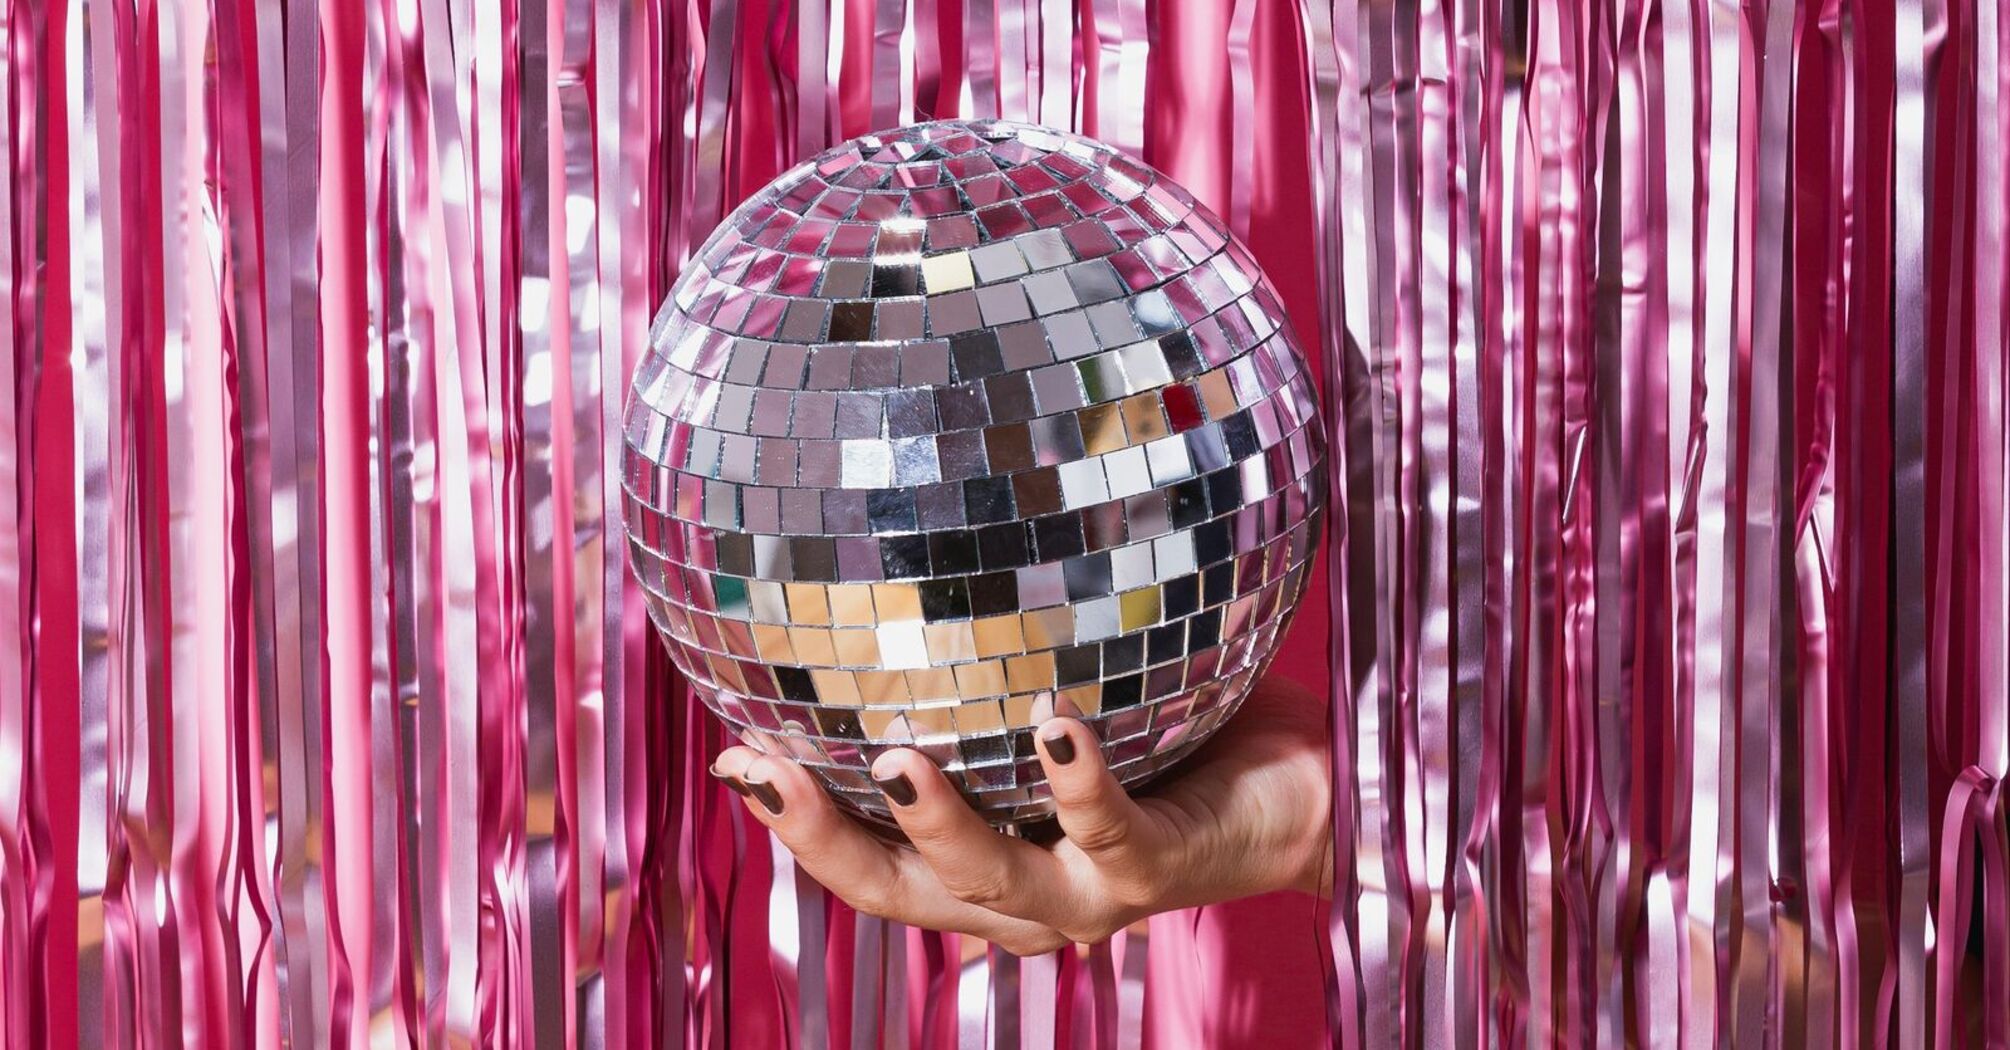 A person holding a disco ball in front of a background of shiny pink tinsel streamers